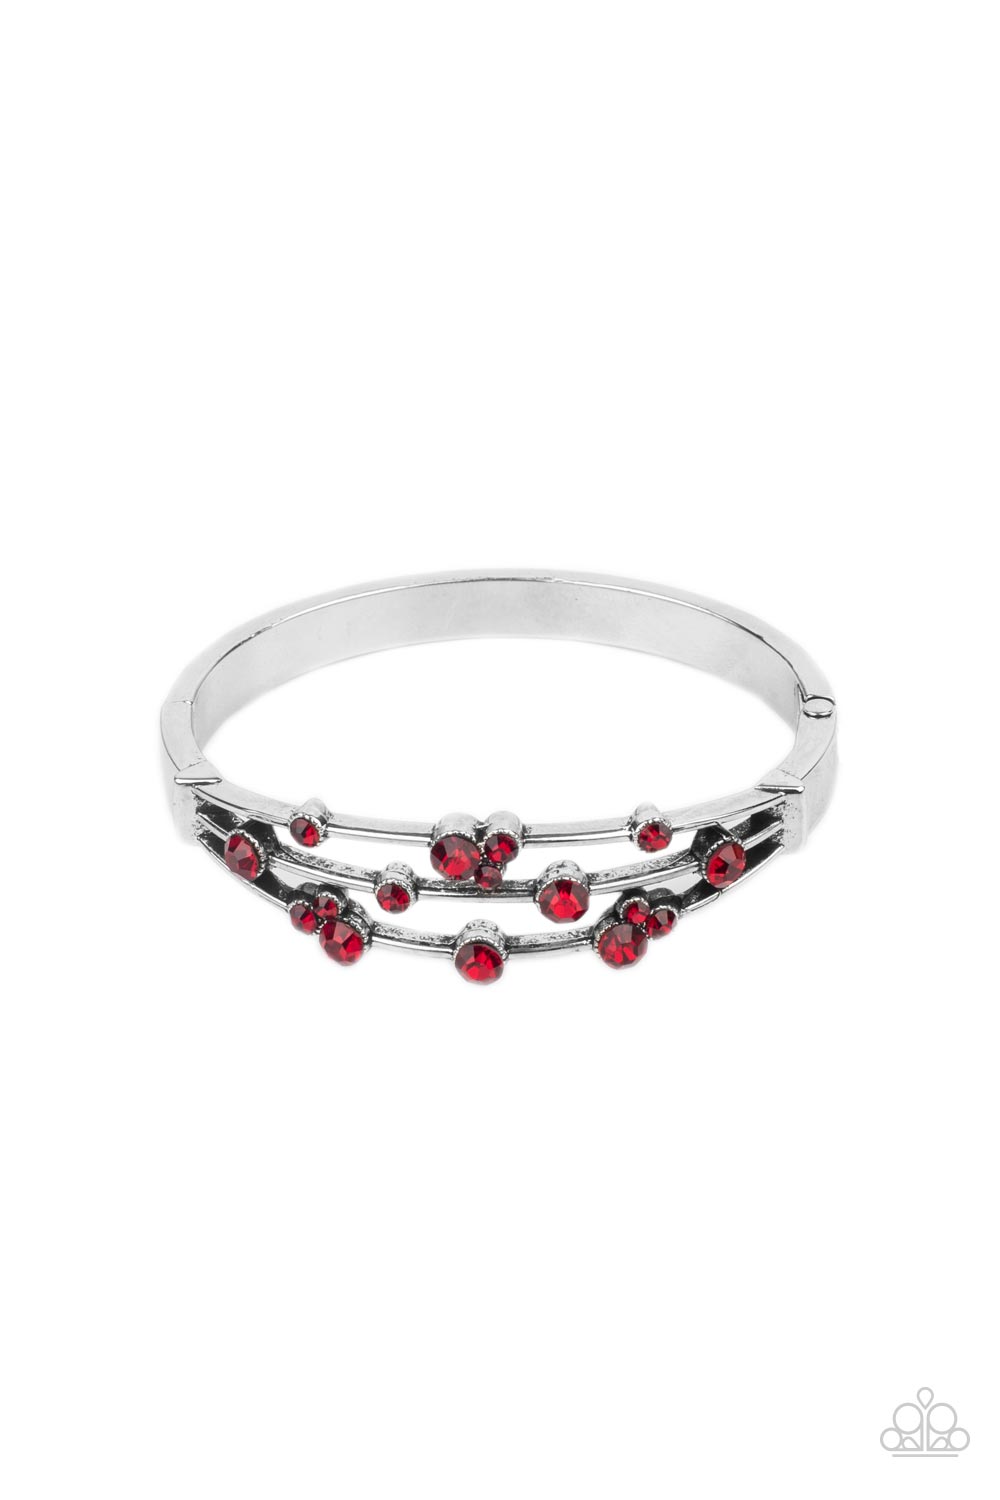 Paparazzi Bracelets - Cosmic Candescence - Red